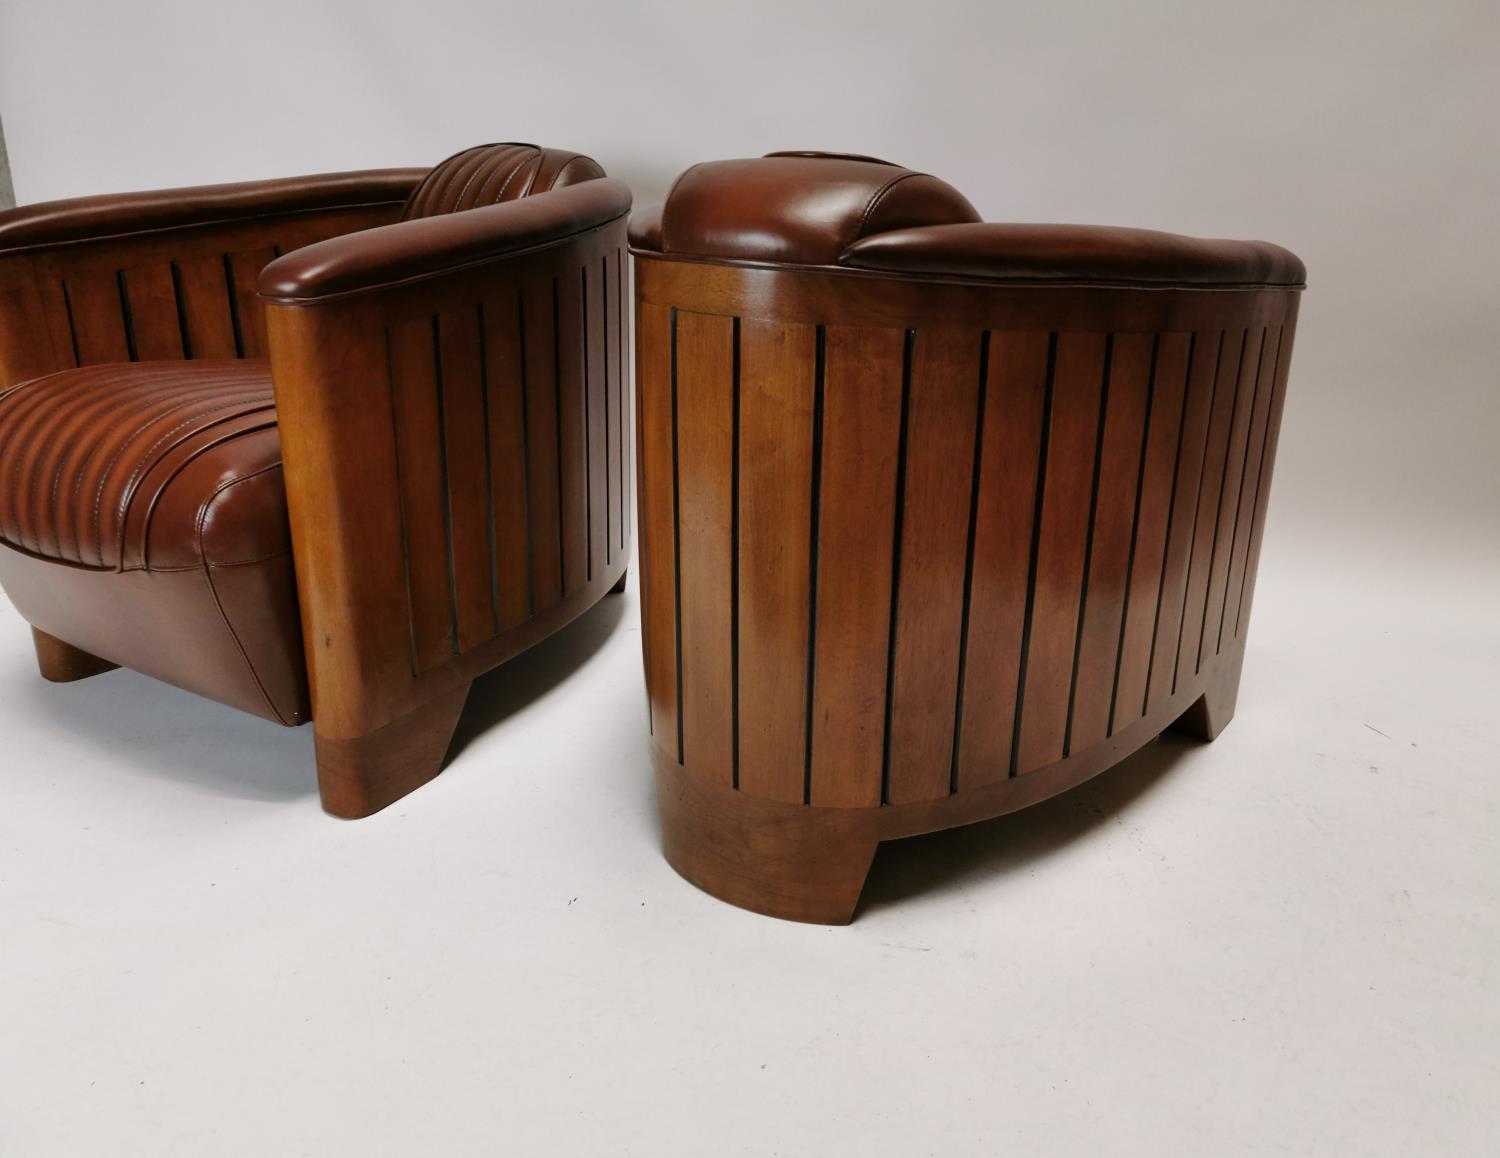 Pair of exceptional quality Art Deco style leather upholstered and wood Aviator club chairs {72 cm H - Image 4 of 4